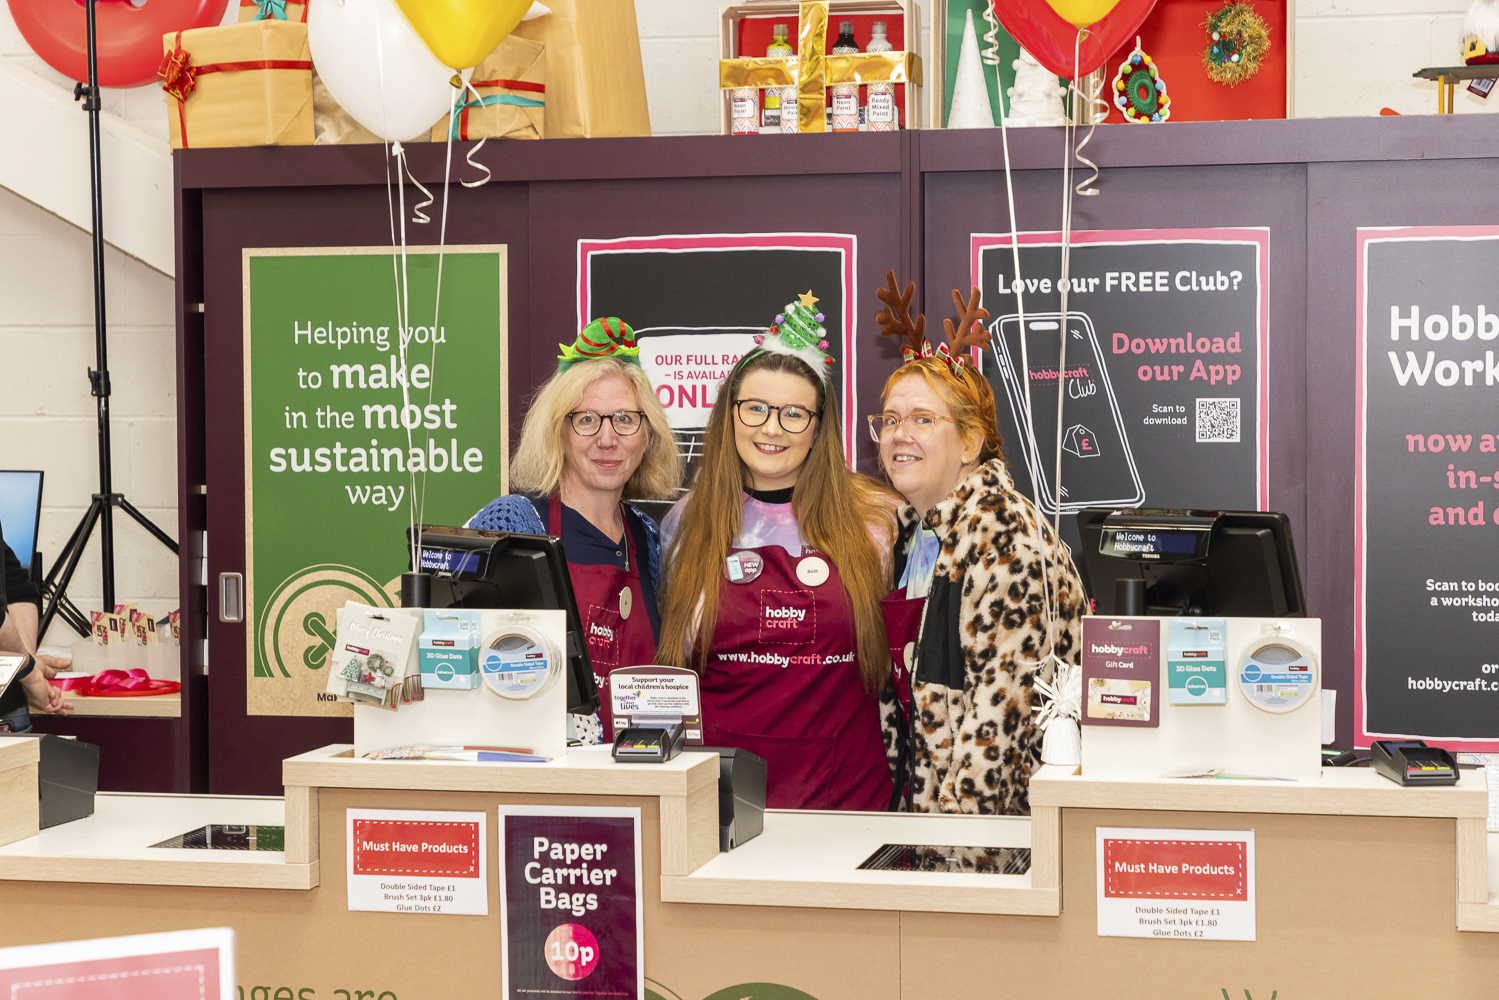 Hobbycraft celebrated the opening of its new store at Meols Cop Retail Park, Southport. Photographer: Leon Britton Photography